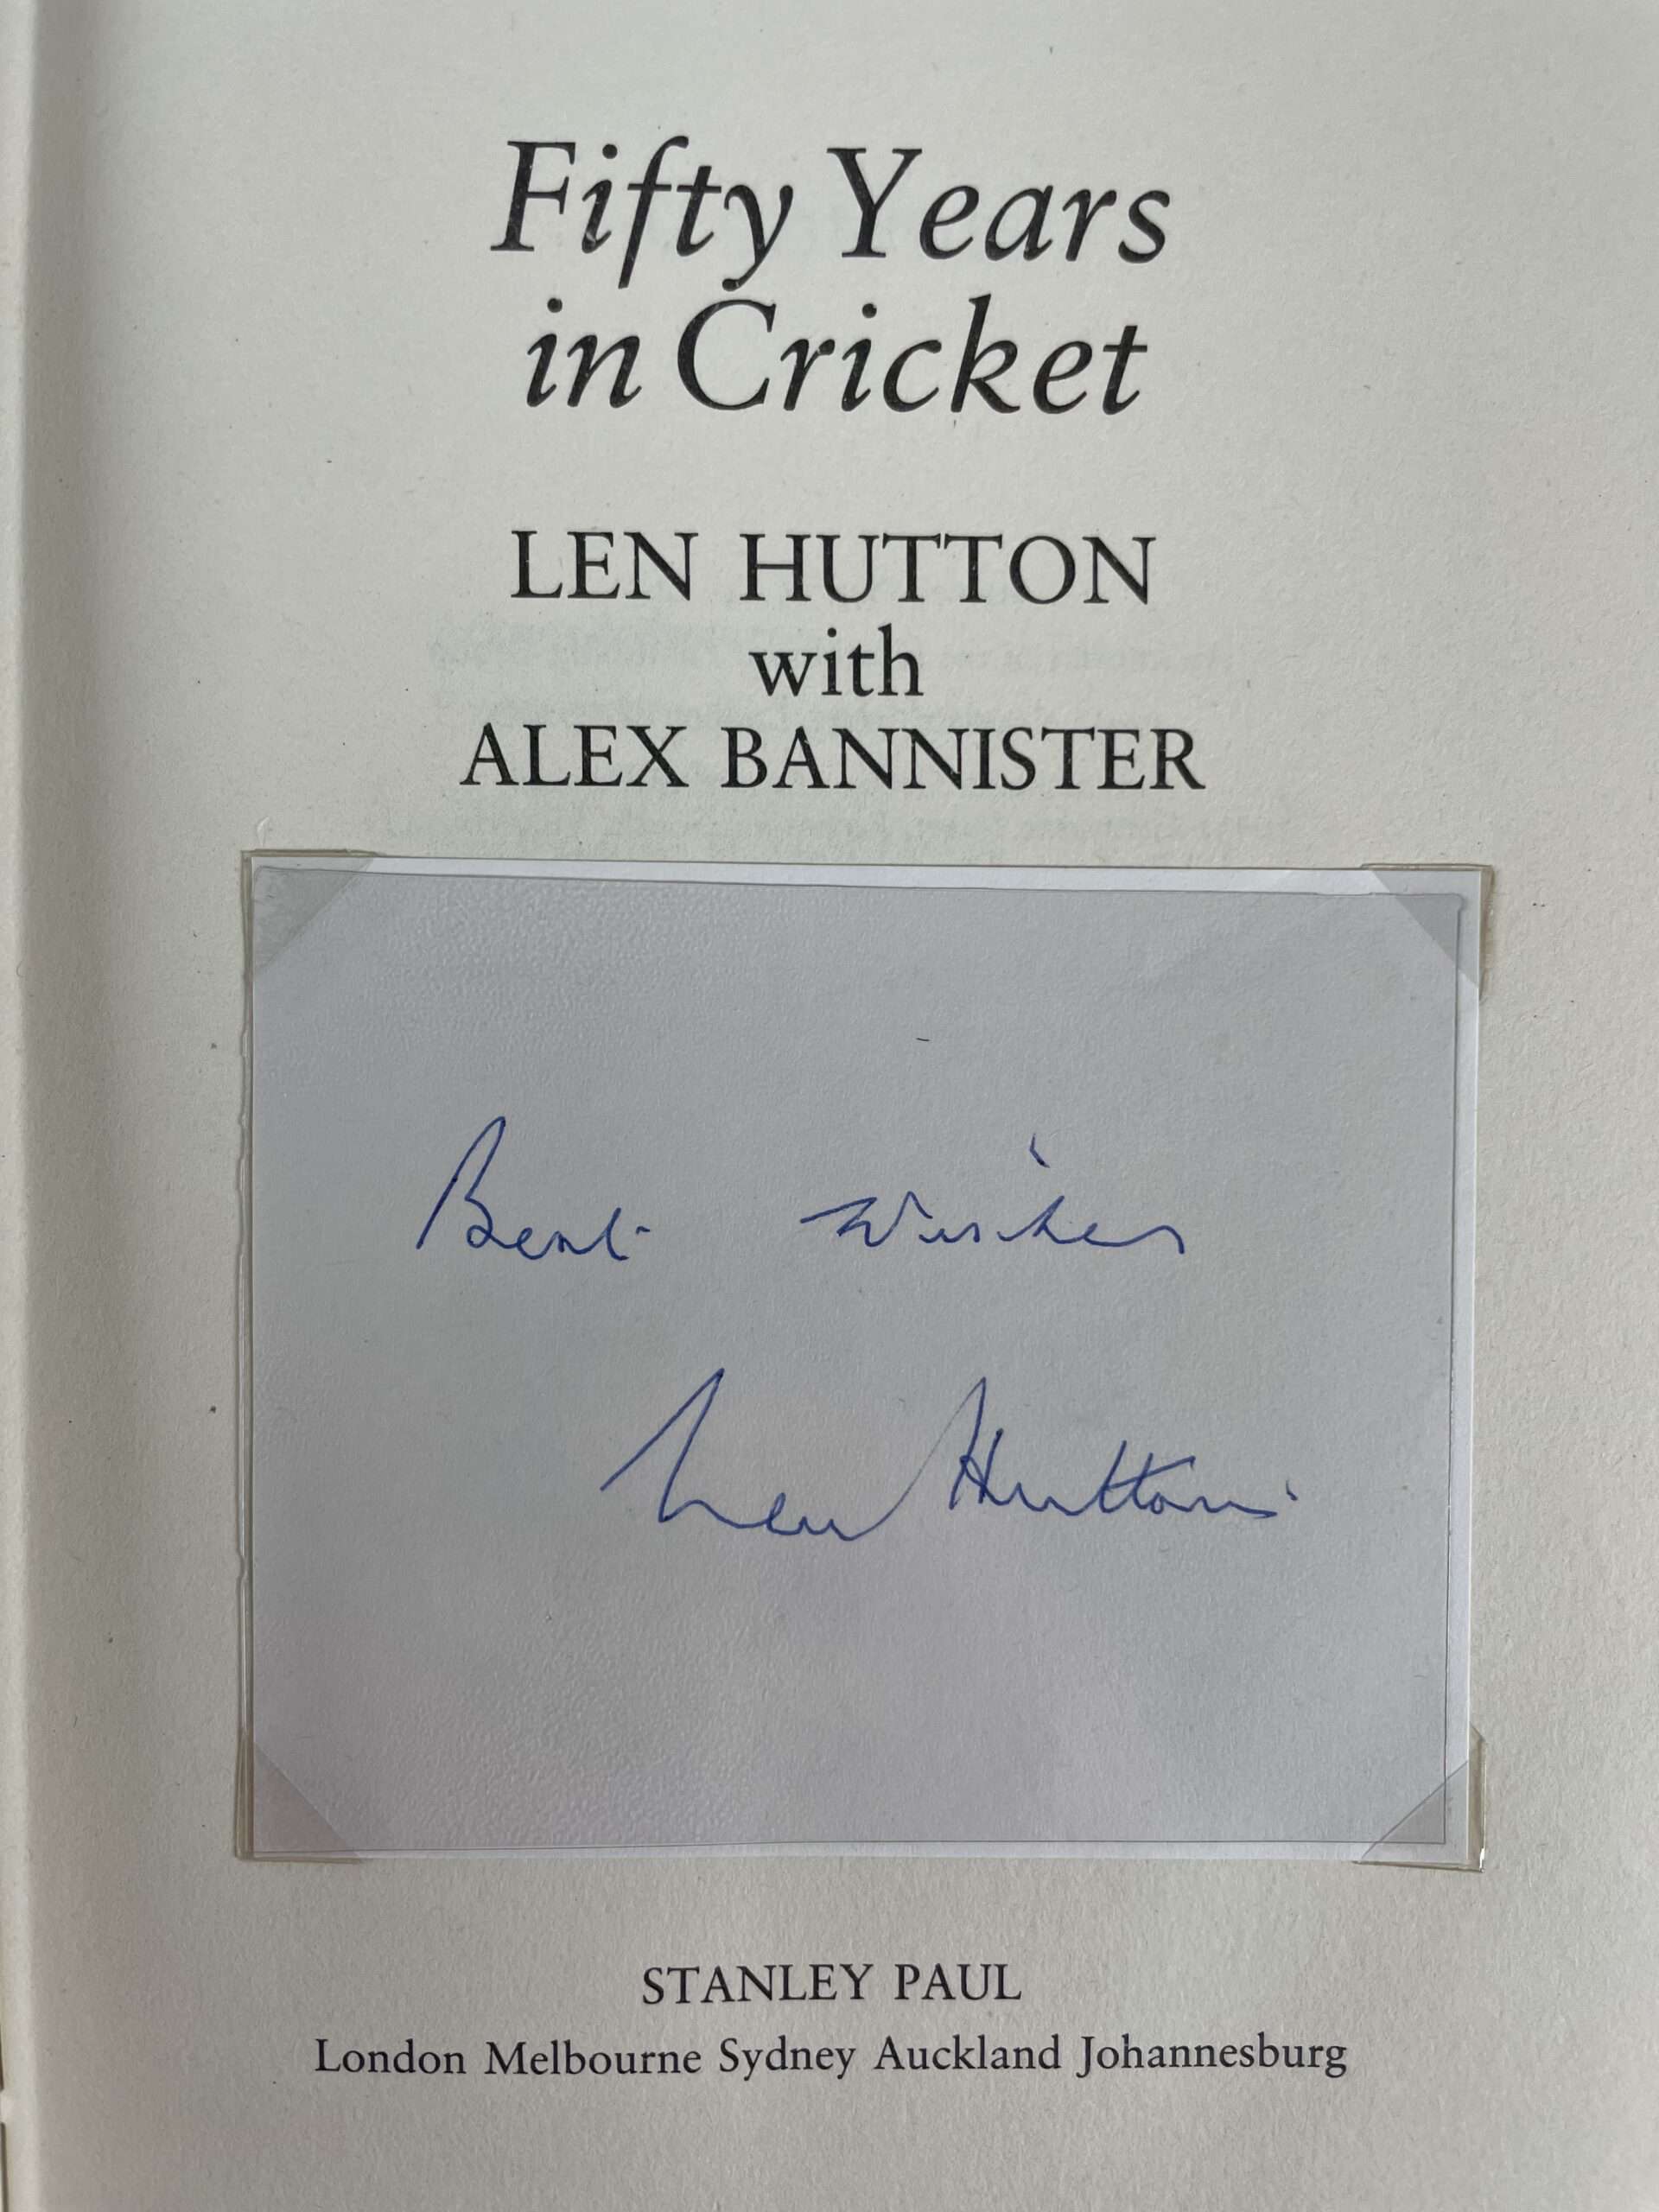 len hutton fifty years in cricket signed first edition2